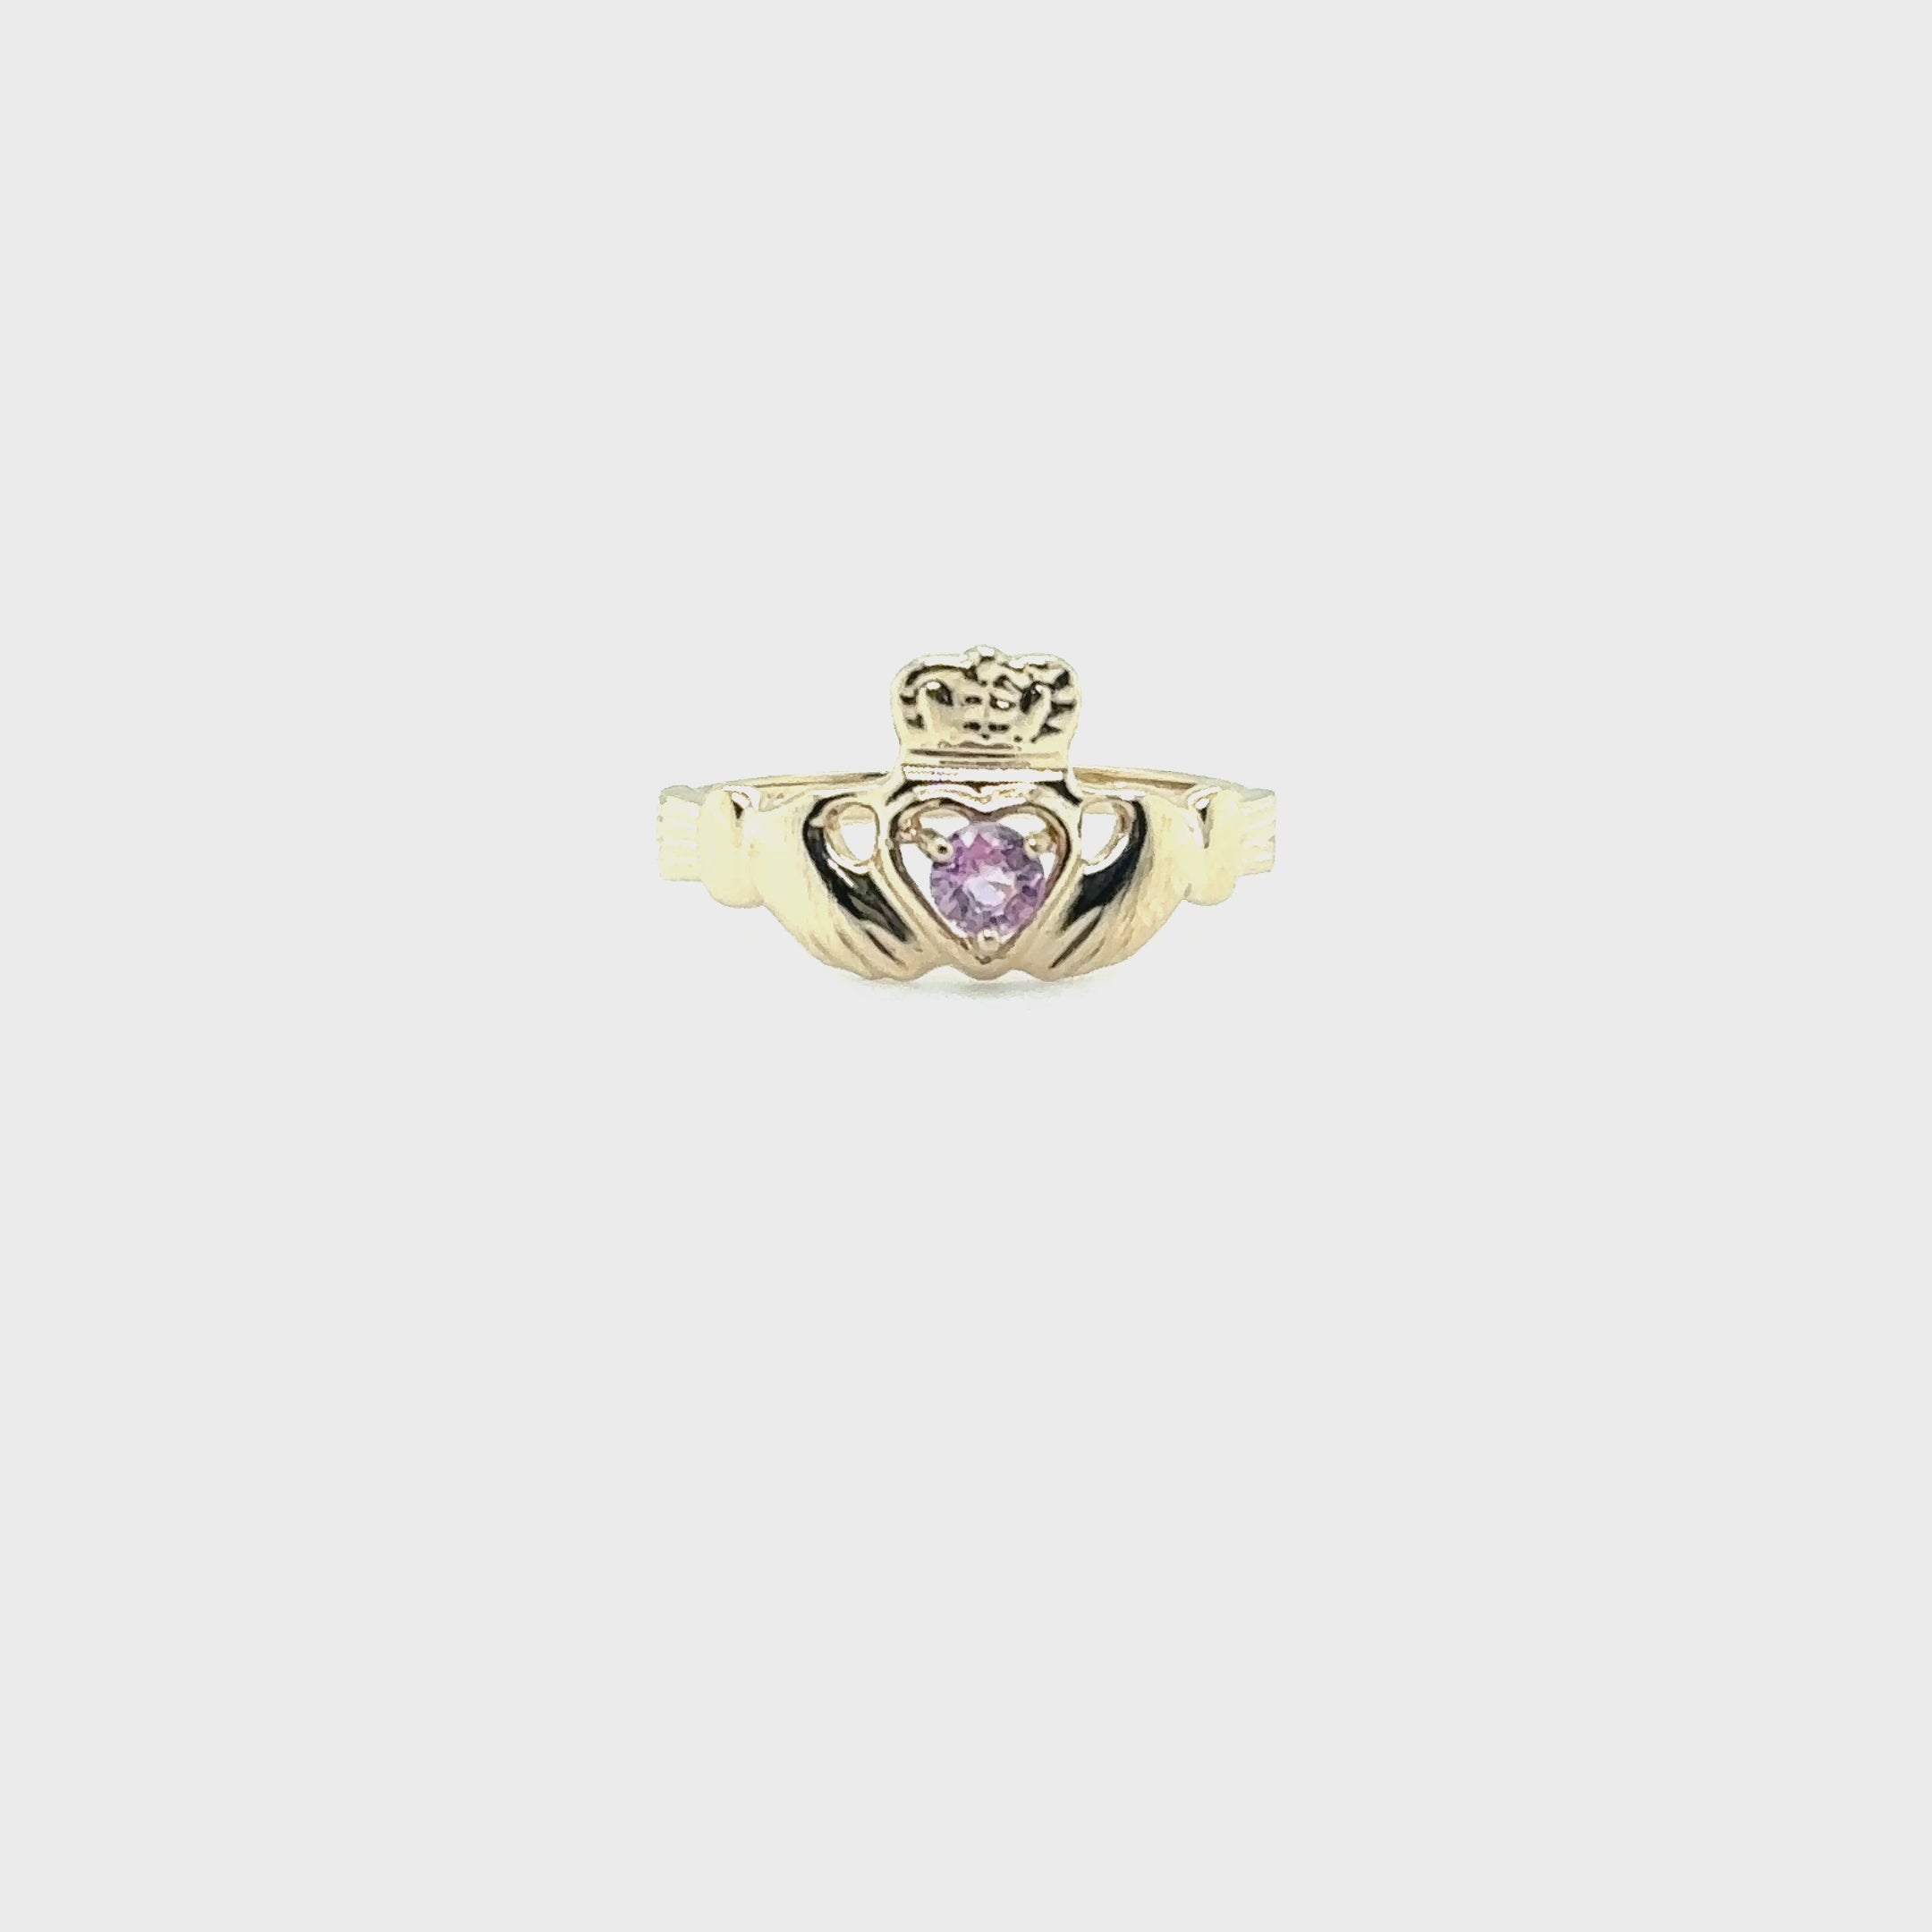 Irish Claddagh Ring Natural Padparadscha Sapphire Ring 10K Solid Gold .21ct Gemstone Ring Heart Ring Engagement Ring Promise Ring Jewellery